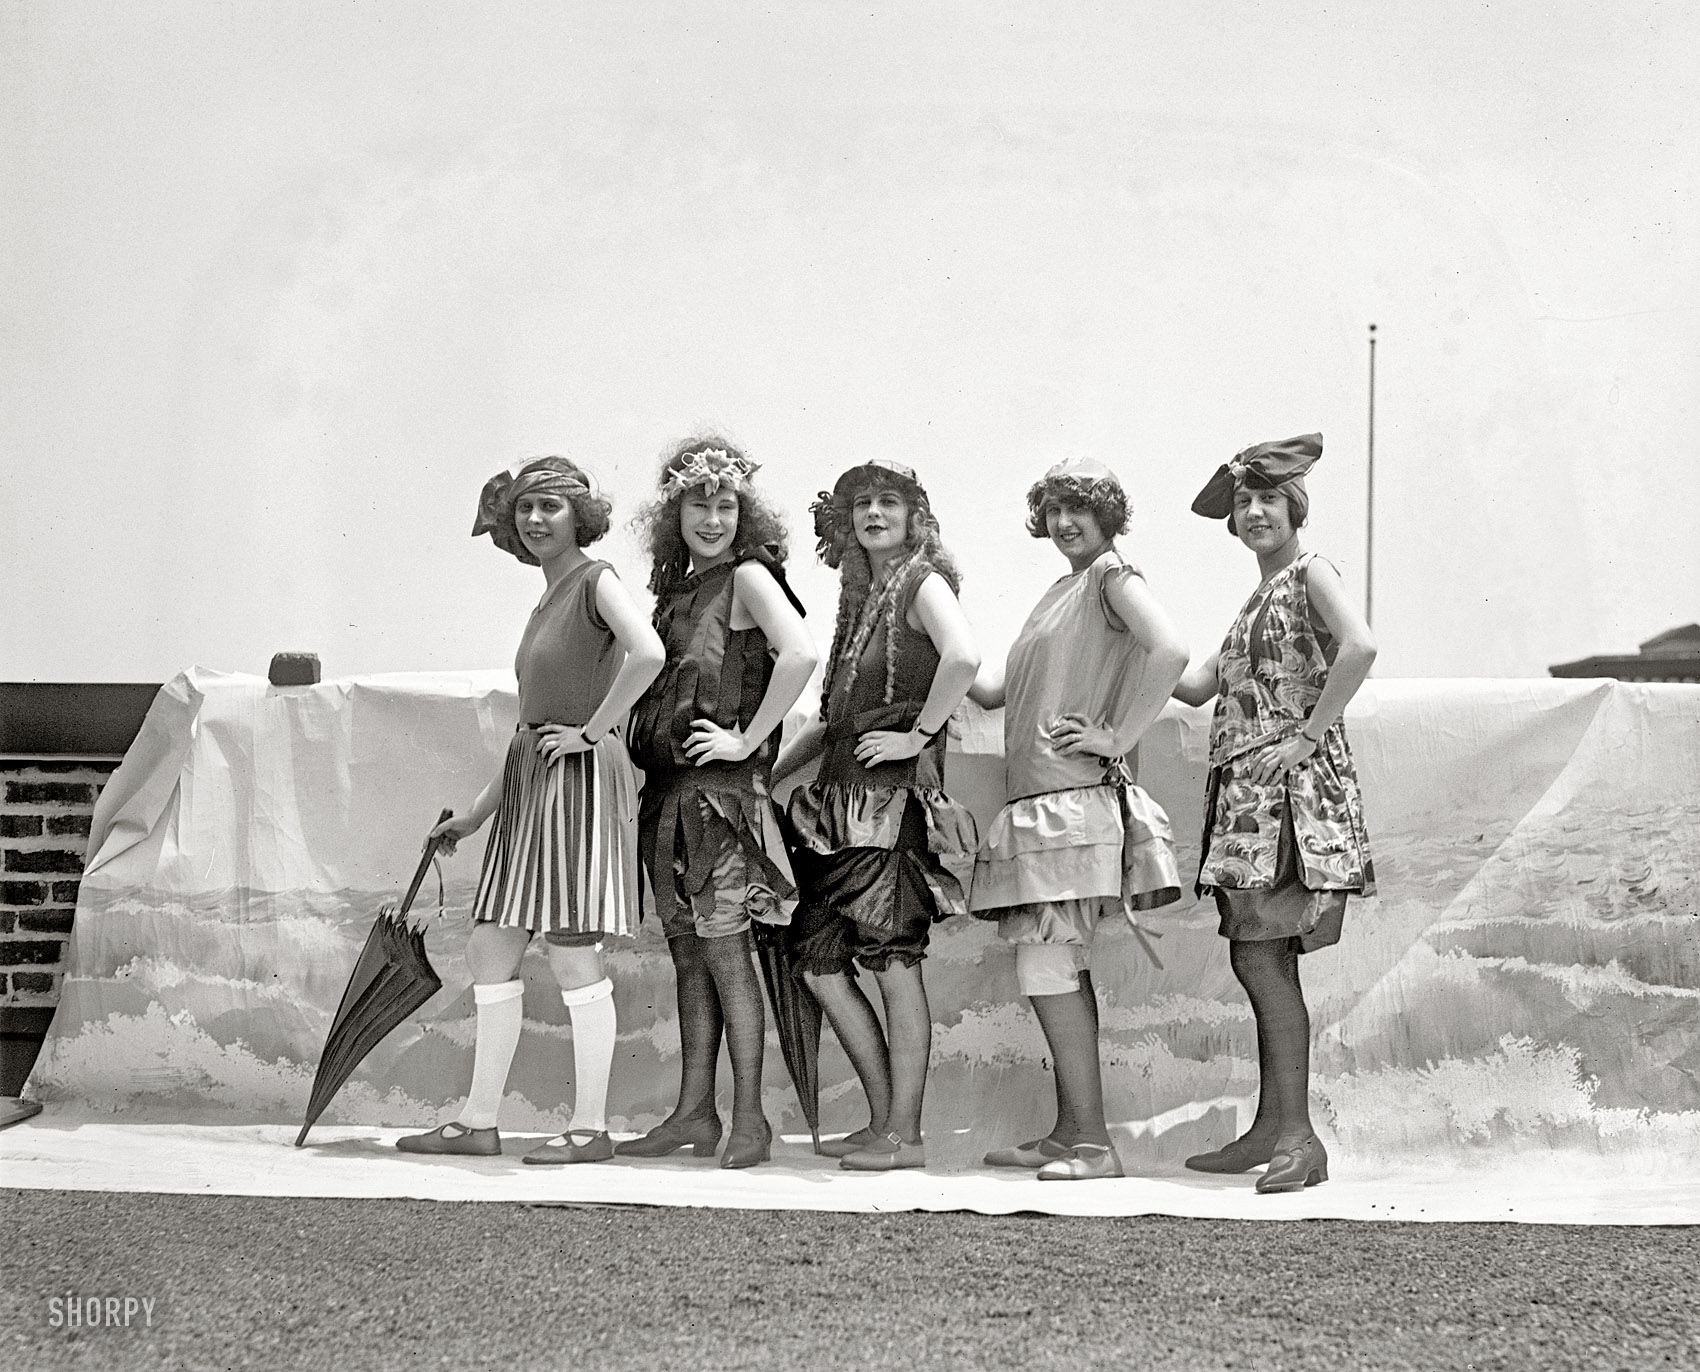 "Lansburgh Bathing Girls, 1922." Avert your eyes, gentlemen -- the leftmost lady's knees are showing. Next to her, Shorpy regulars will recognize Iola Swinnerton, winsome Washington beauty. National Photo glass negative. View full size.